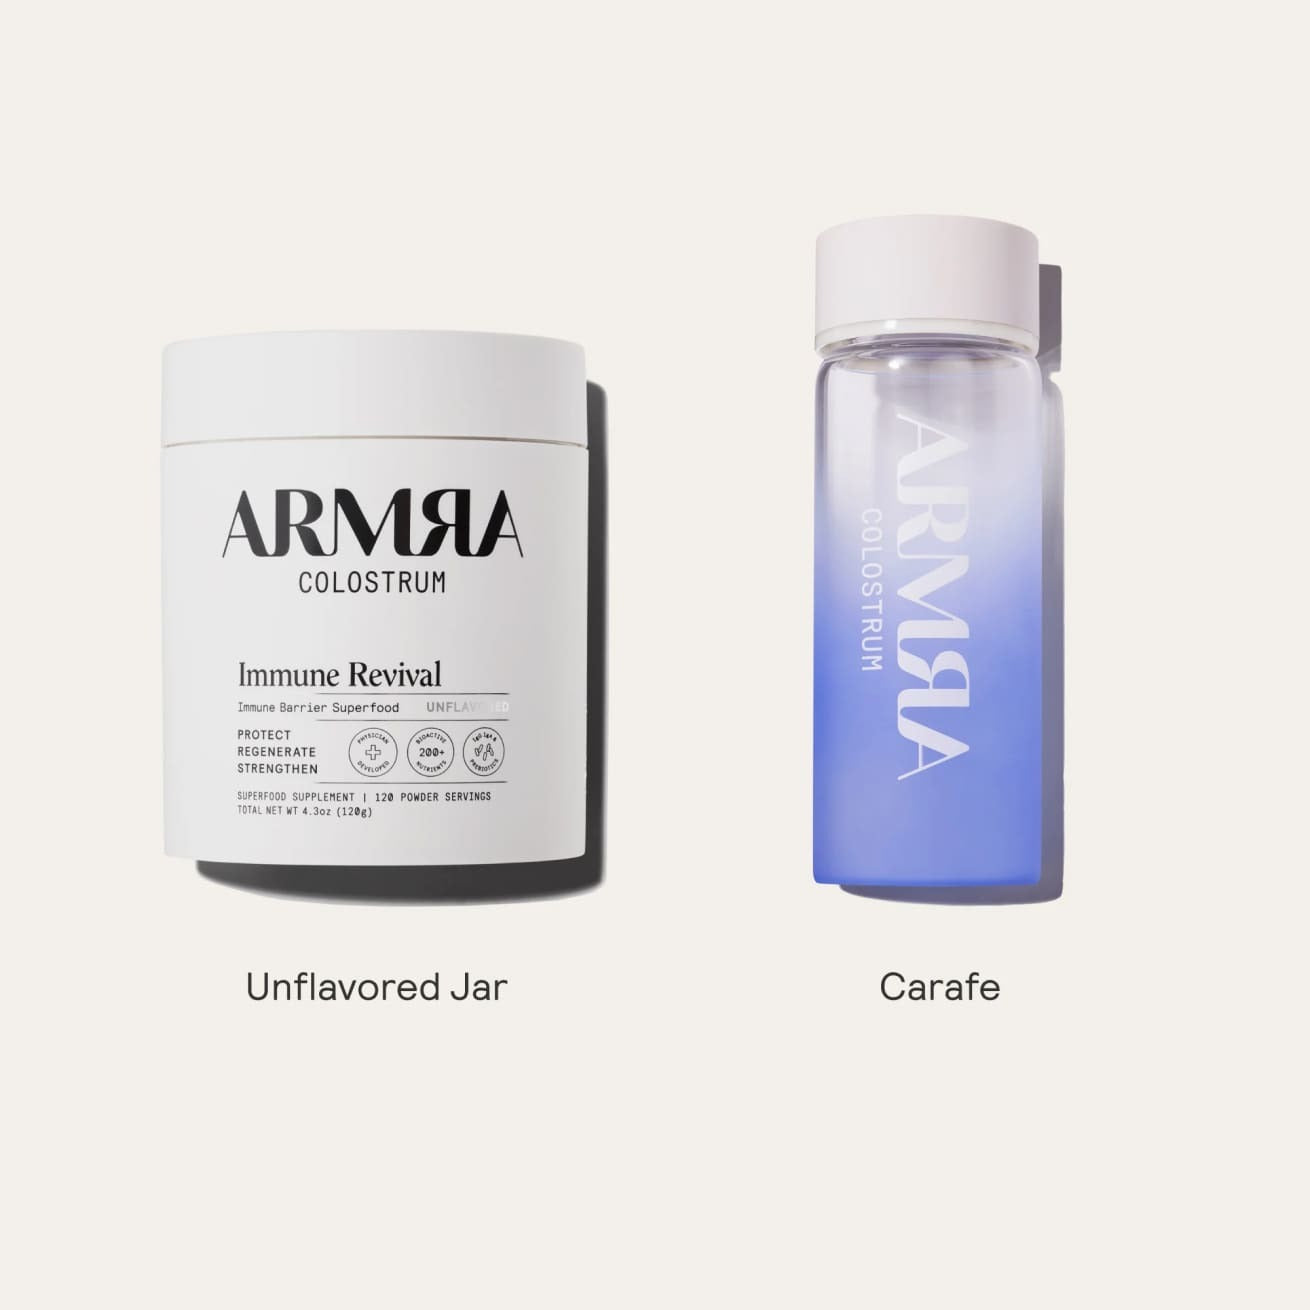 The ARMRA Welcome Kit